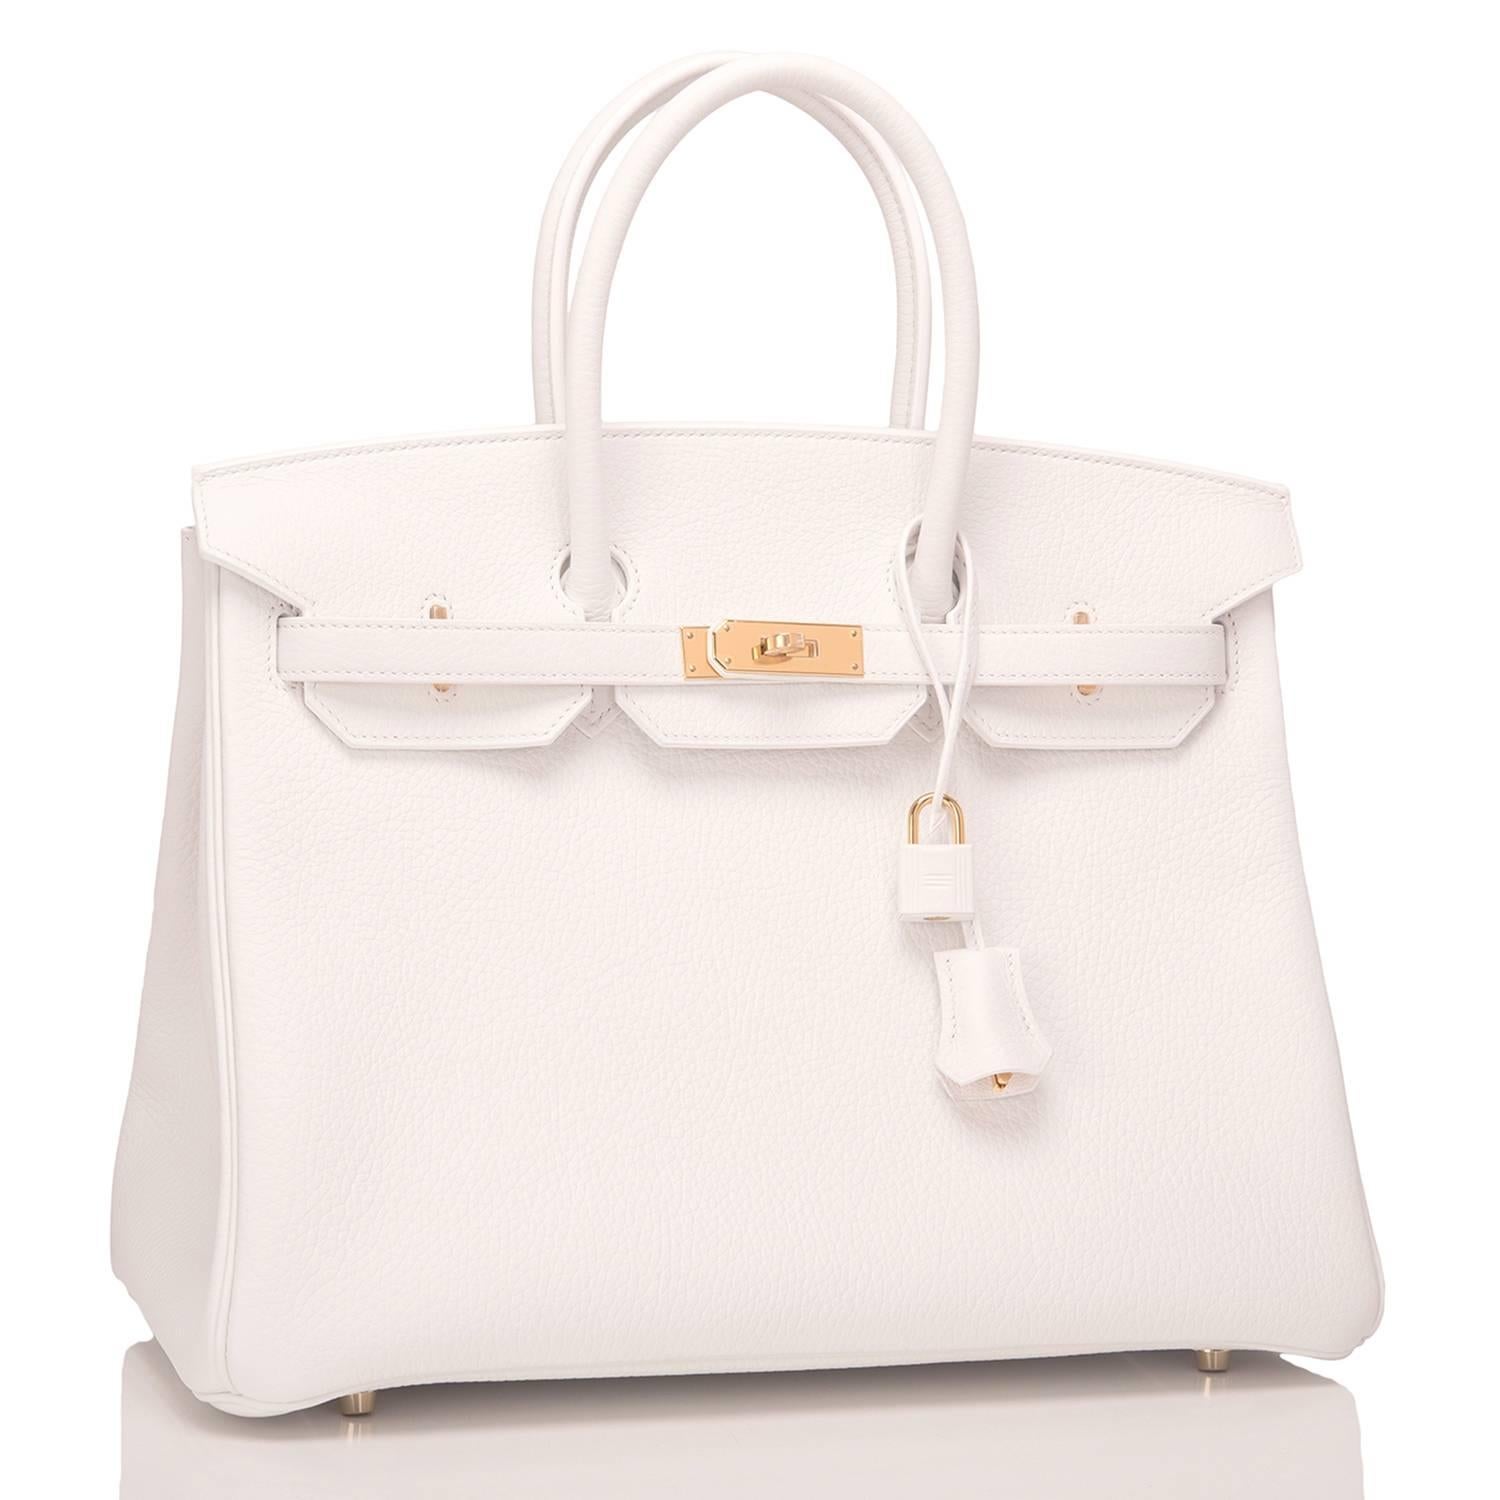 Hermes white Birkin 35cm of taurillon clemence leather with gold hardware.

This white Birkin features tonal stitching, a front toggle closure, a clochette with lock and two keys, and double rolled handles.

The interior is lined with white